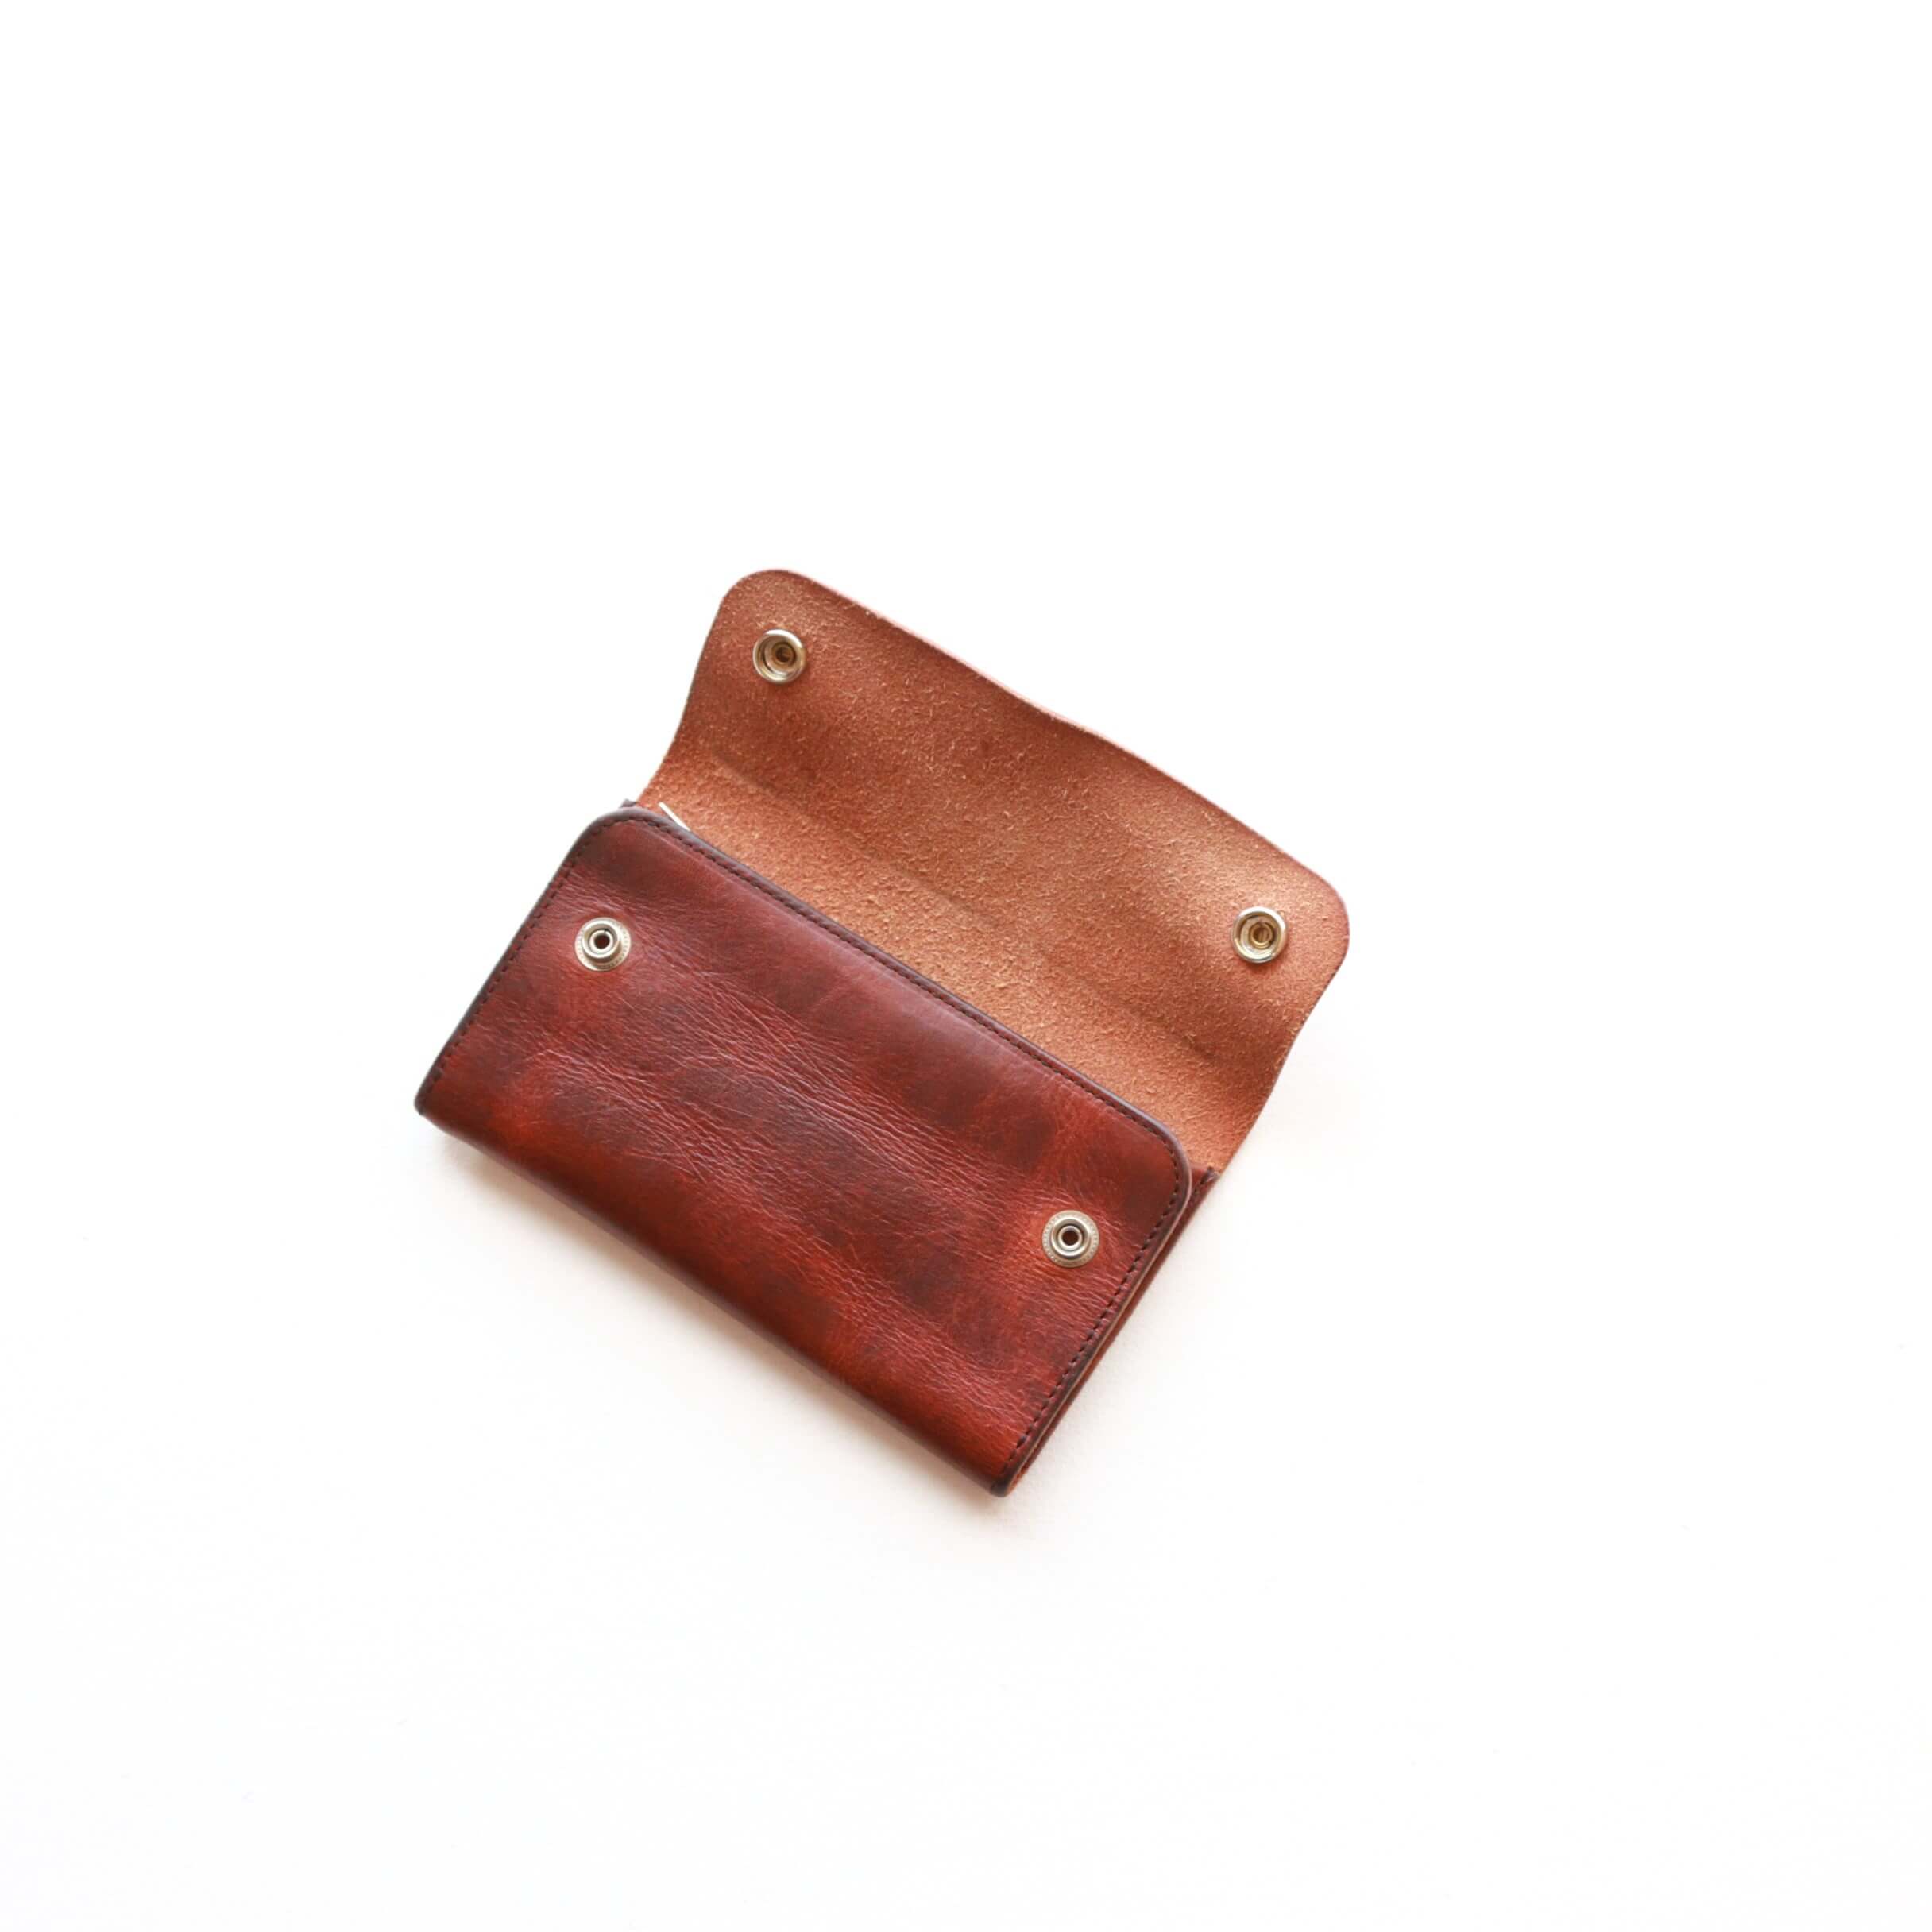 Vintage Works ヴィンテージワークス Leather Wallet アメリカンレザー 